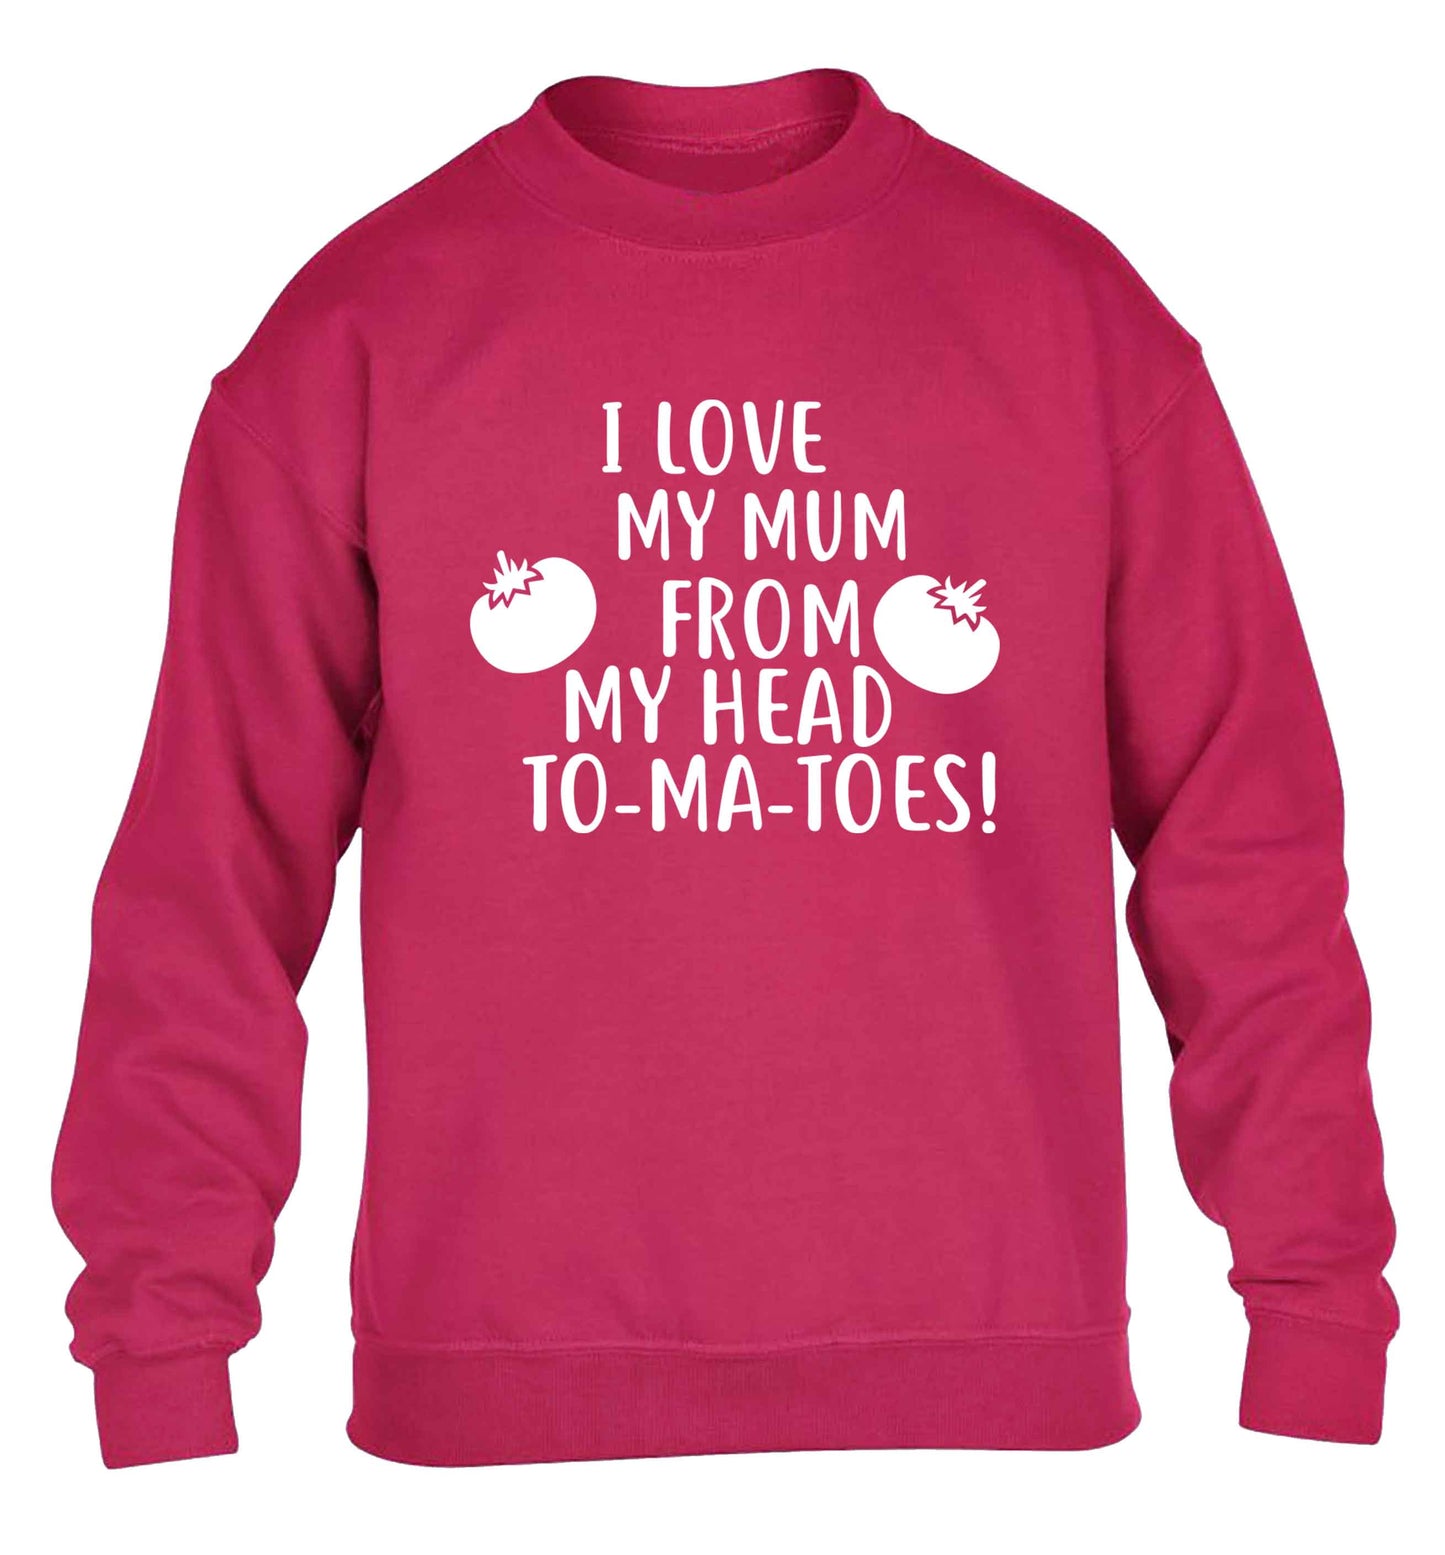 I love my mum from my head to-my-toes! children's pink sweater 12-13 Years